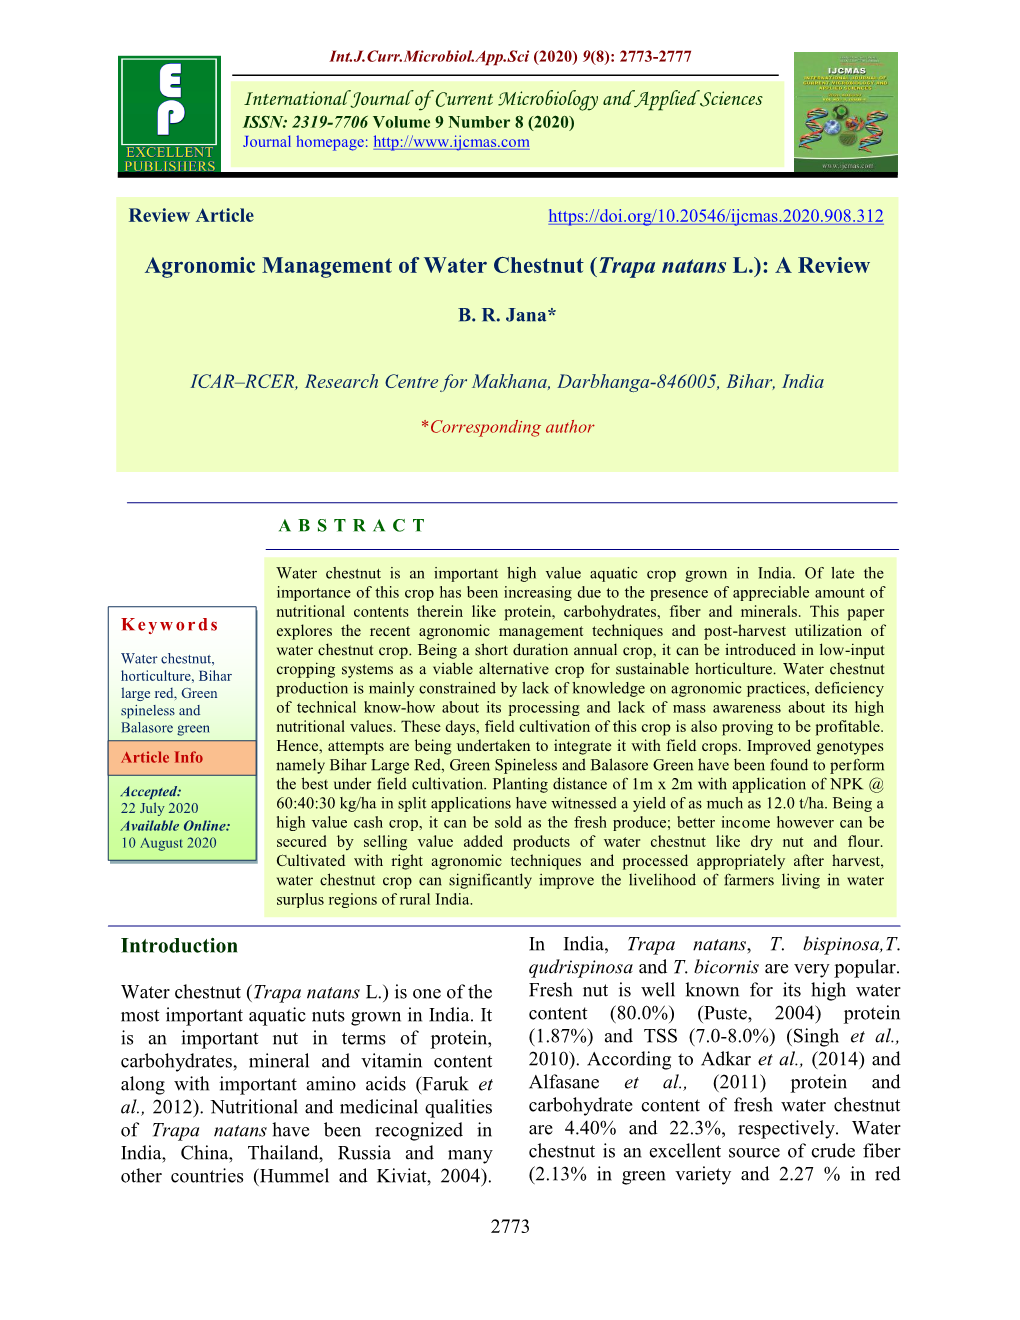 Agronomic Management of Water Chestnut (Trapa Natans L.): a Review